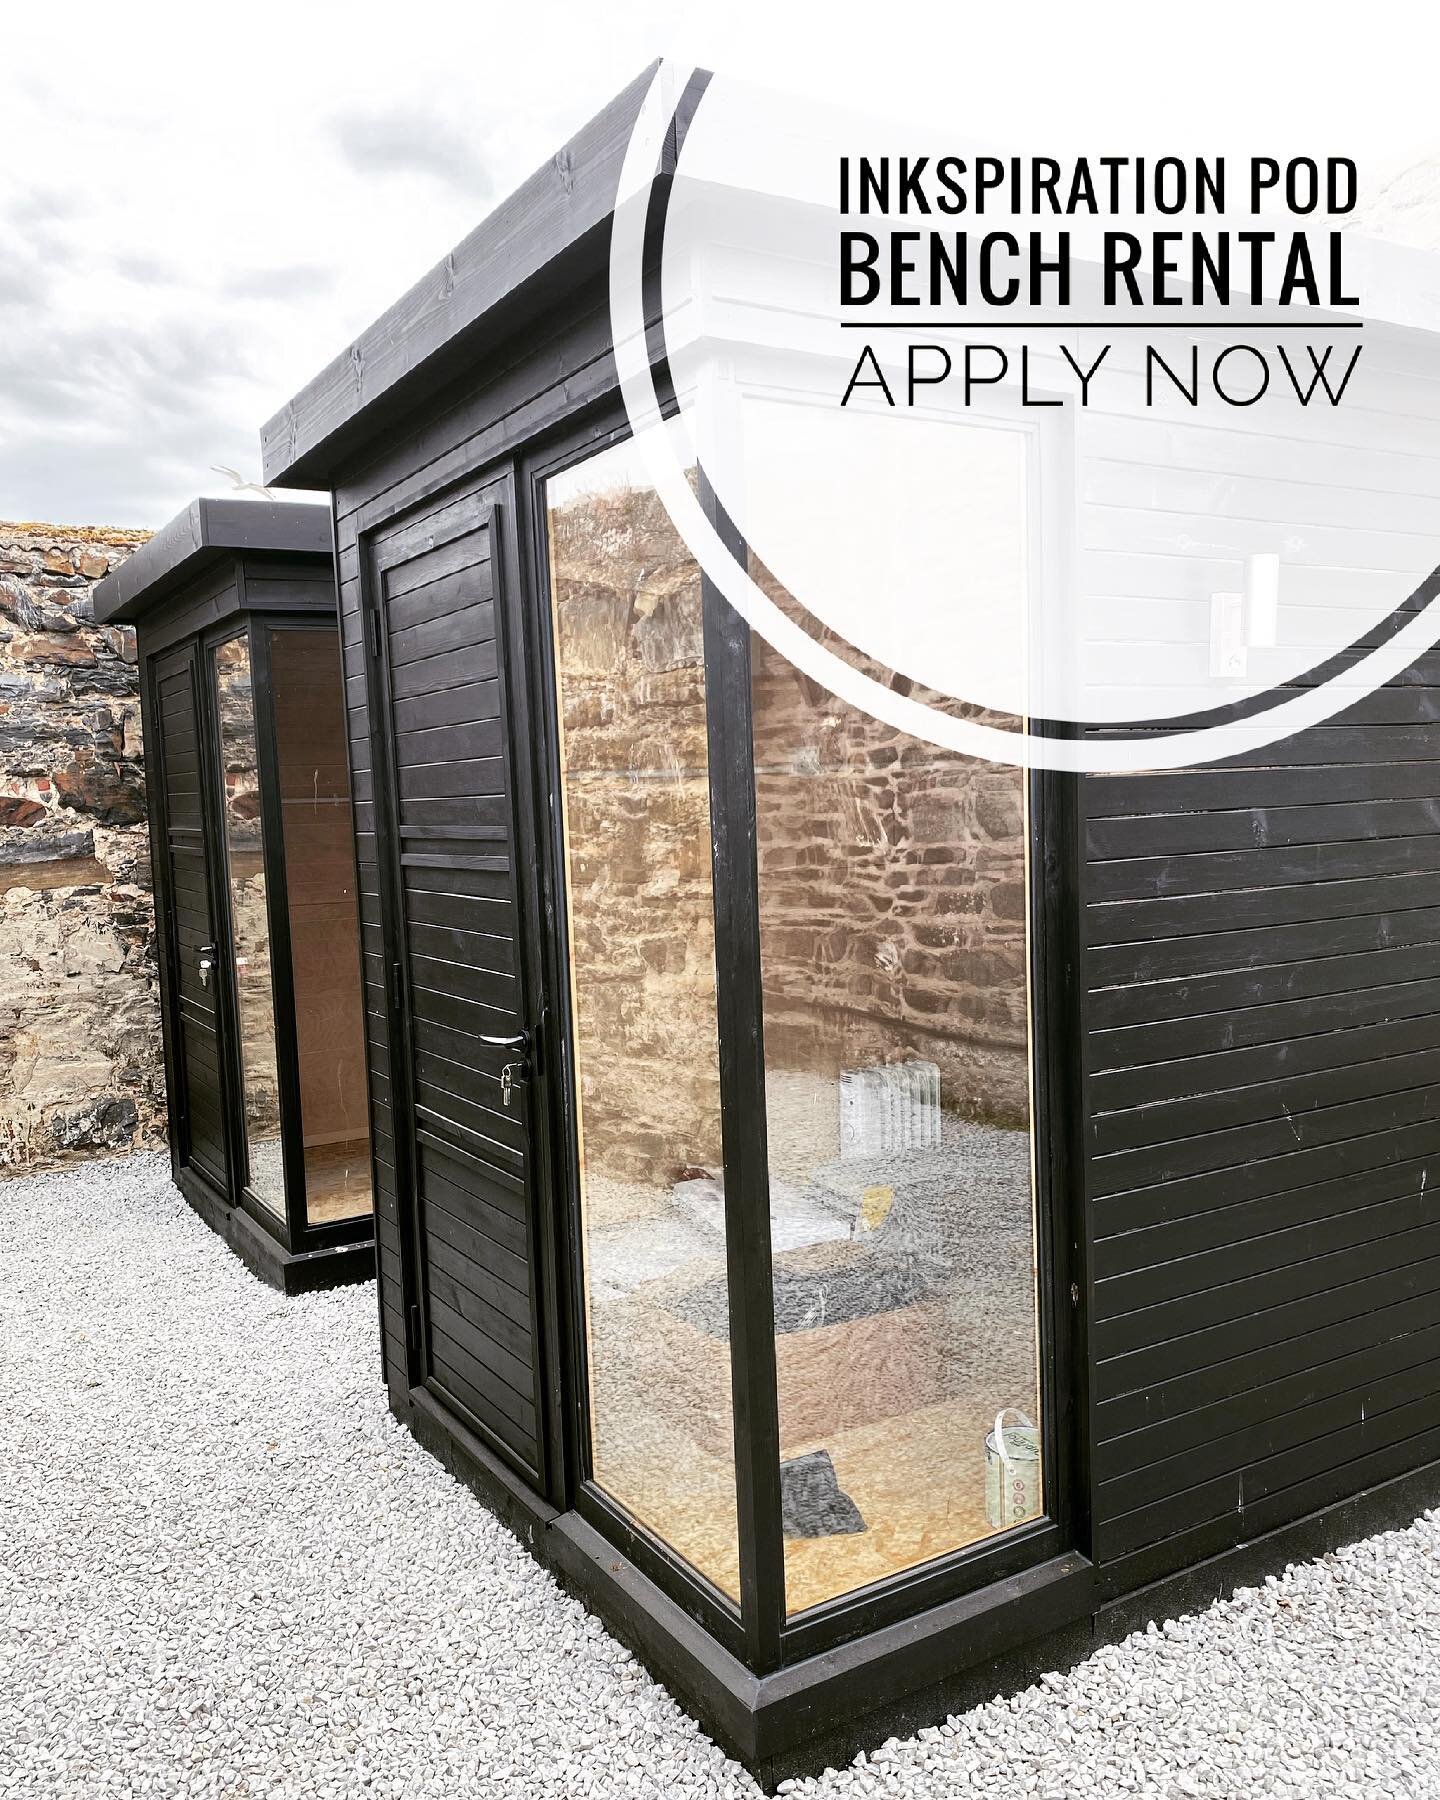 INKSPIRATION PODS AVAILABLE FOR RENT
********************************************
We have 2 BRAND NEW fully insulated pods in our courtyard available for rent. Each INKSPIRATION pod comes with integral bench, adjustable seat, heater and plenty of nat